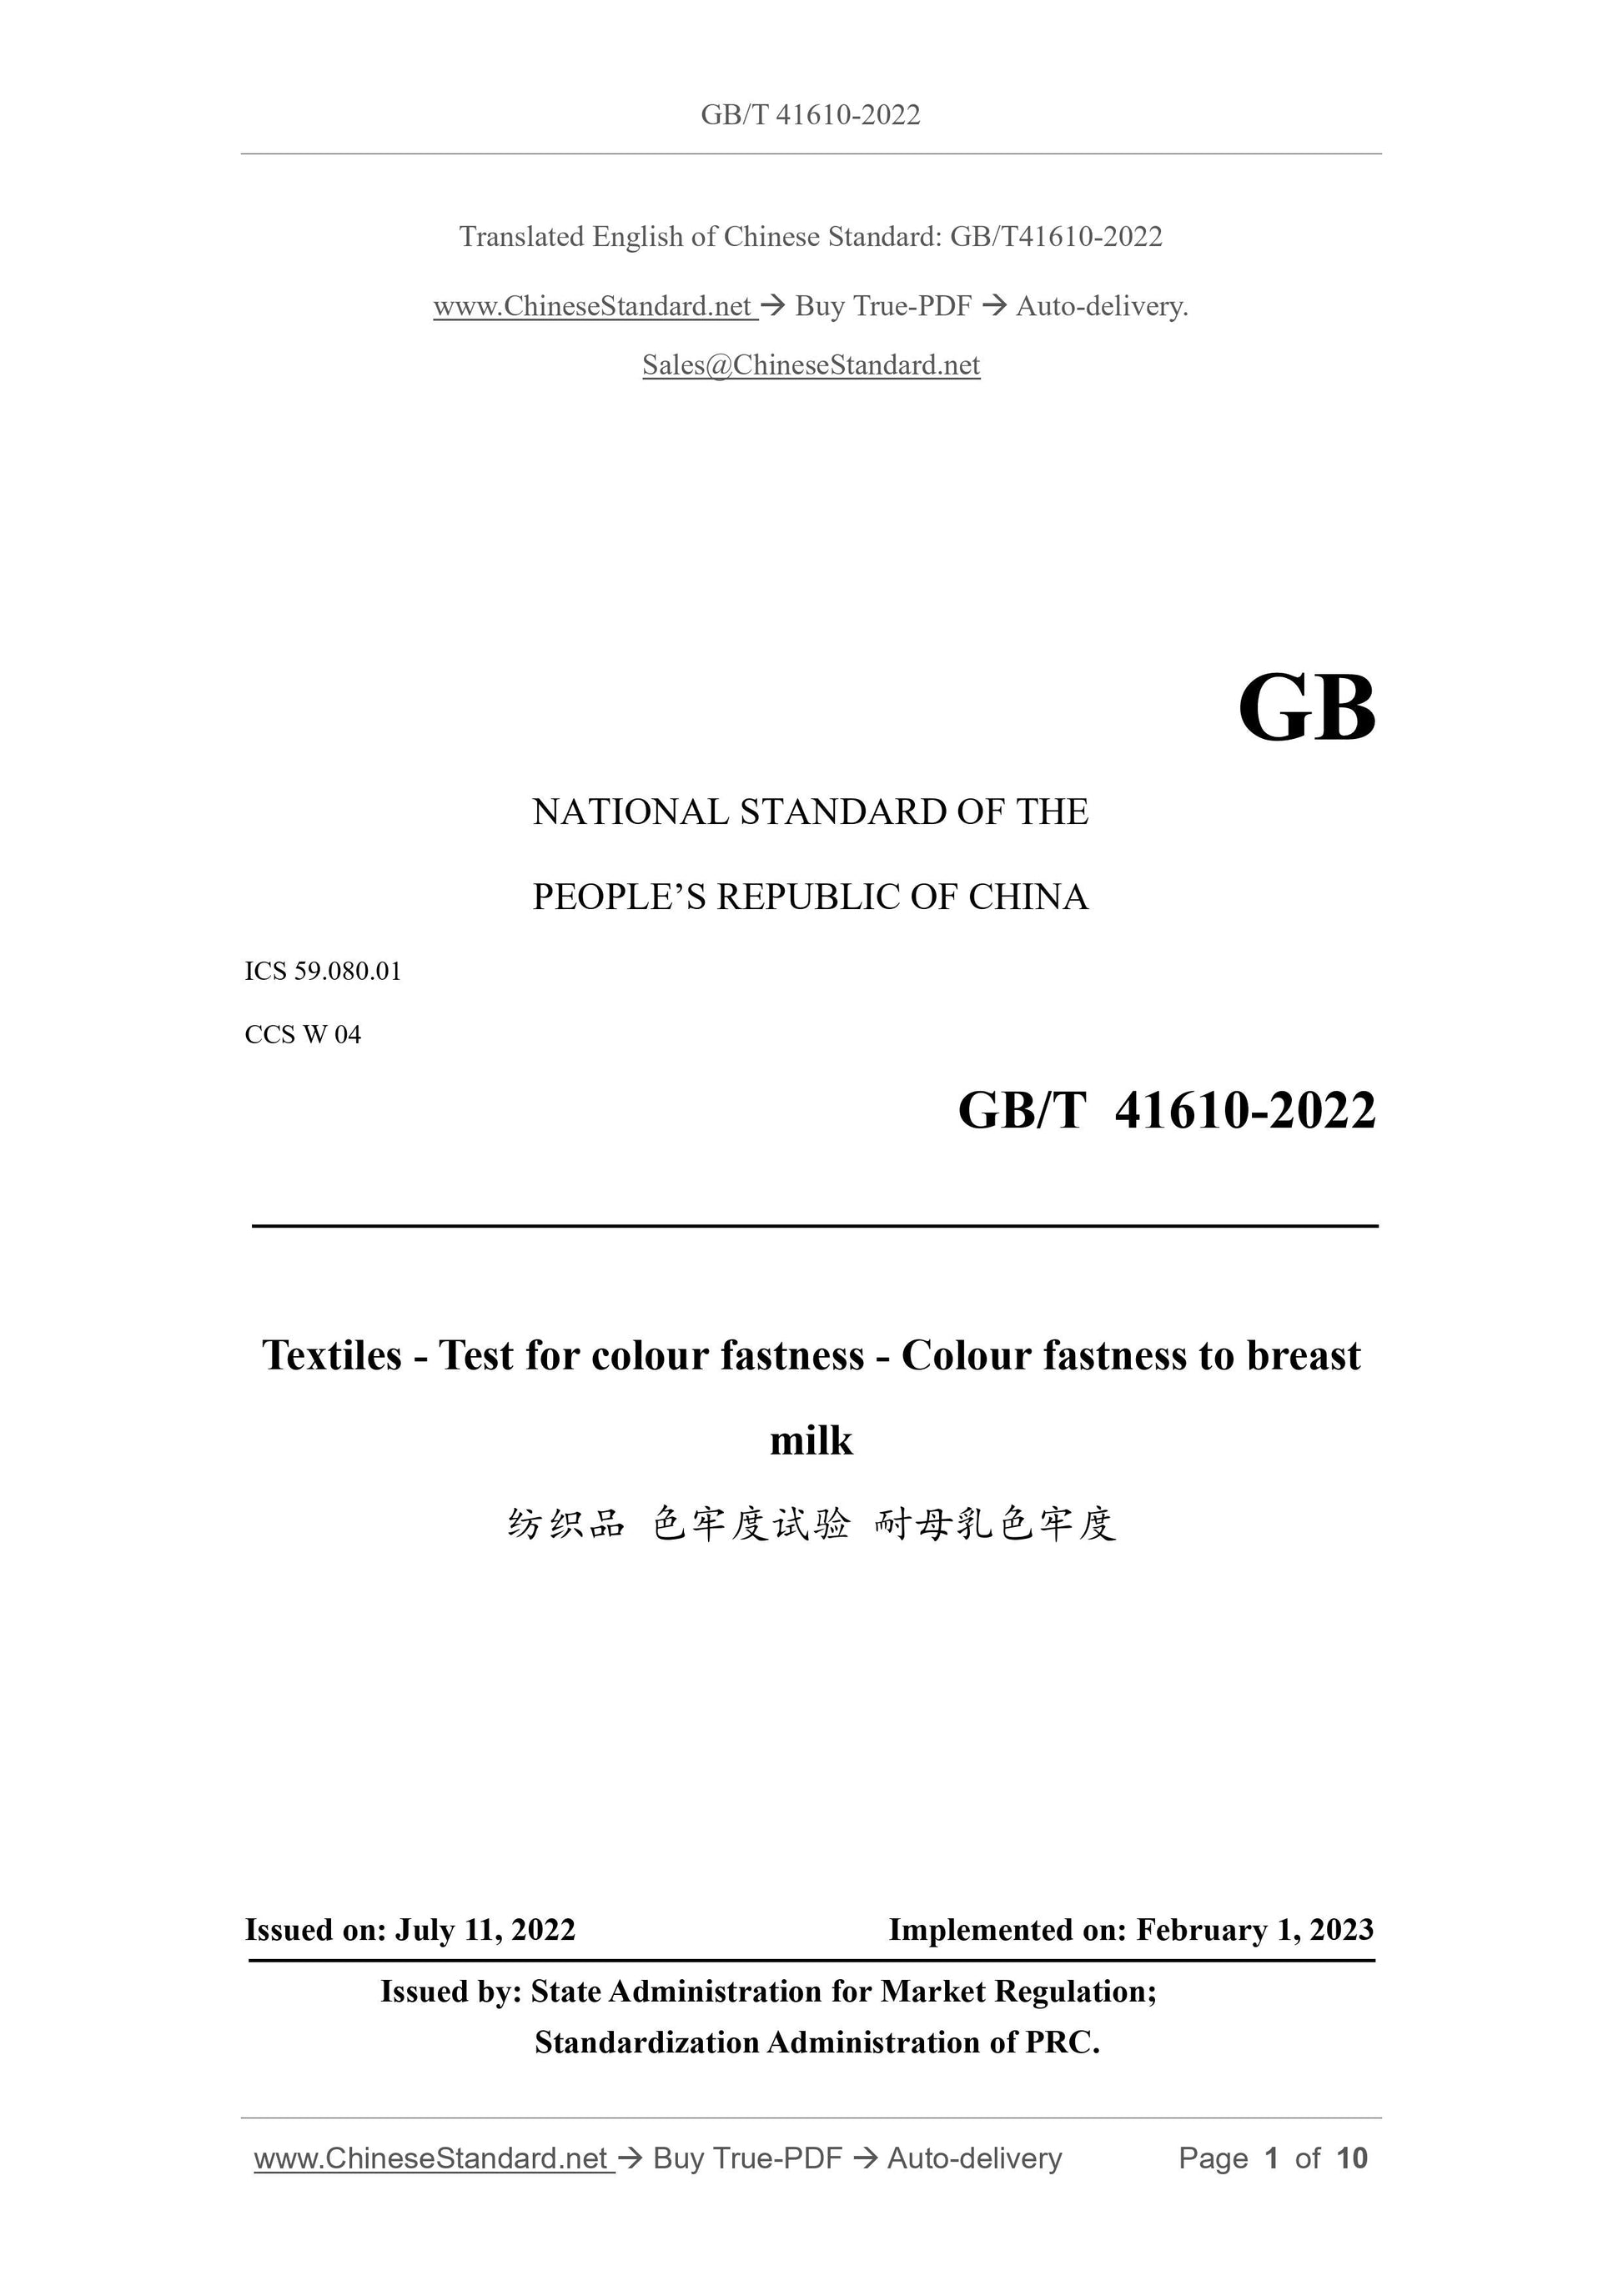 GB/T 41610-2022 Page 1